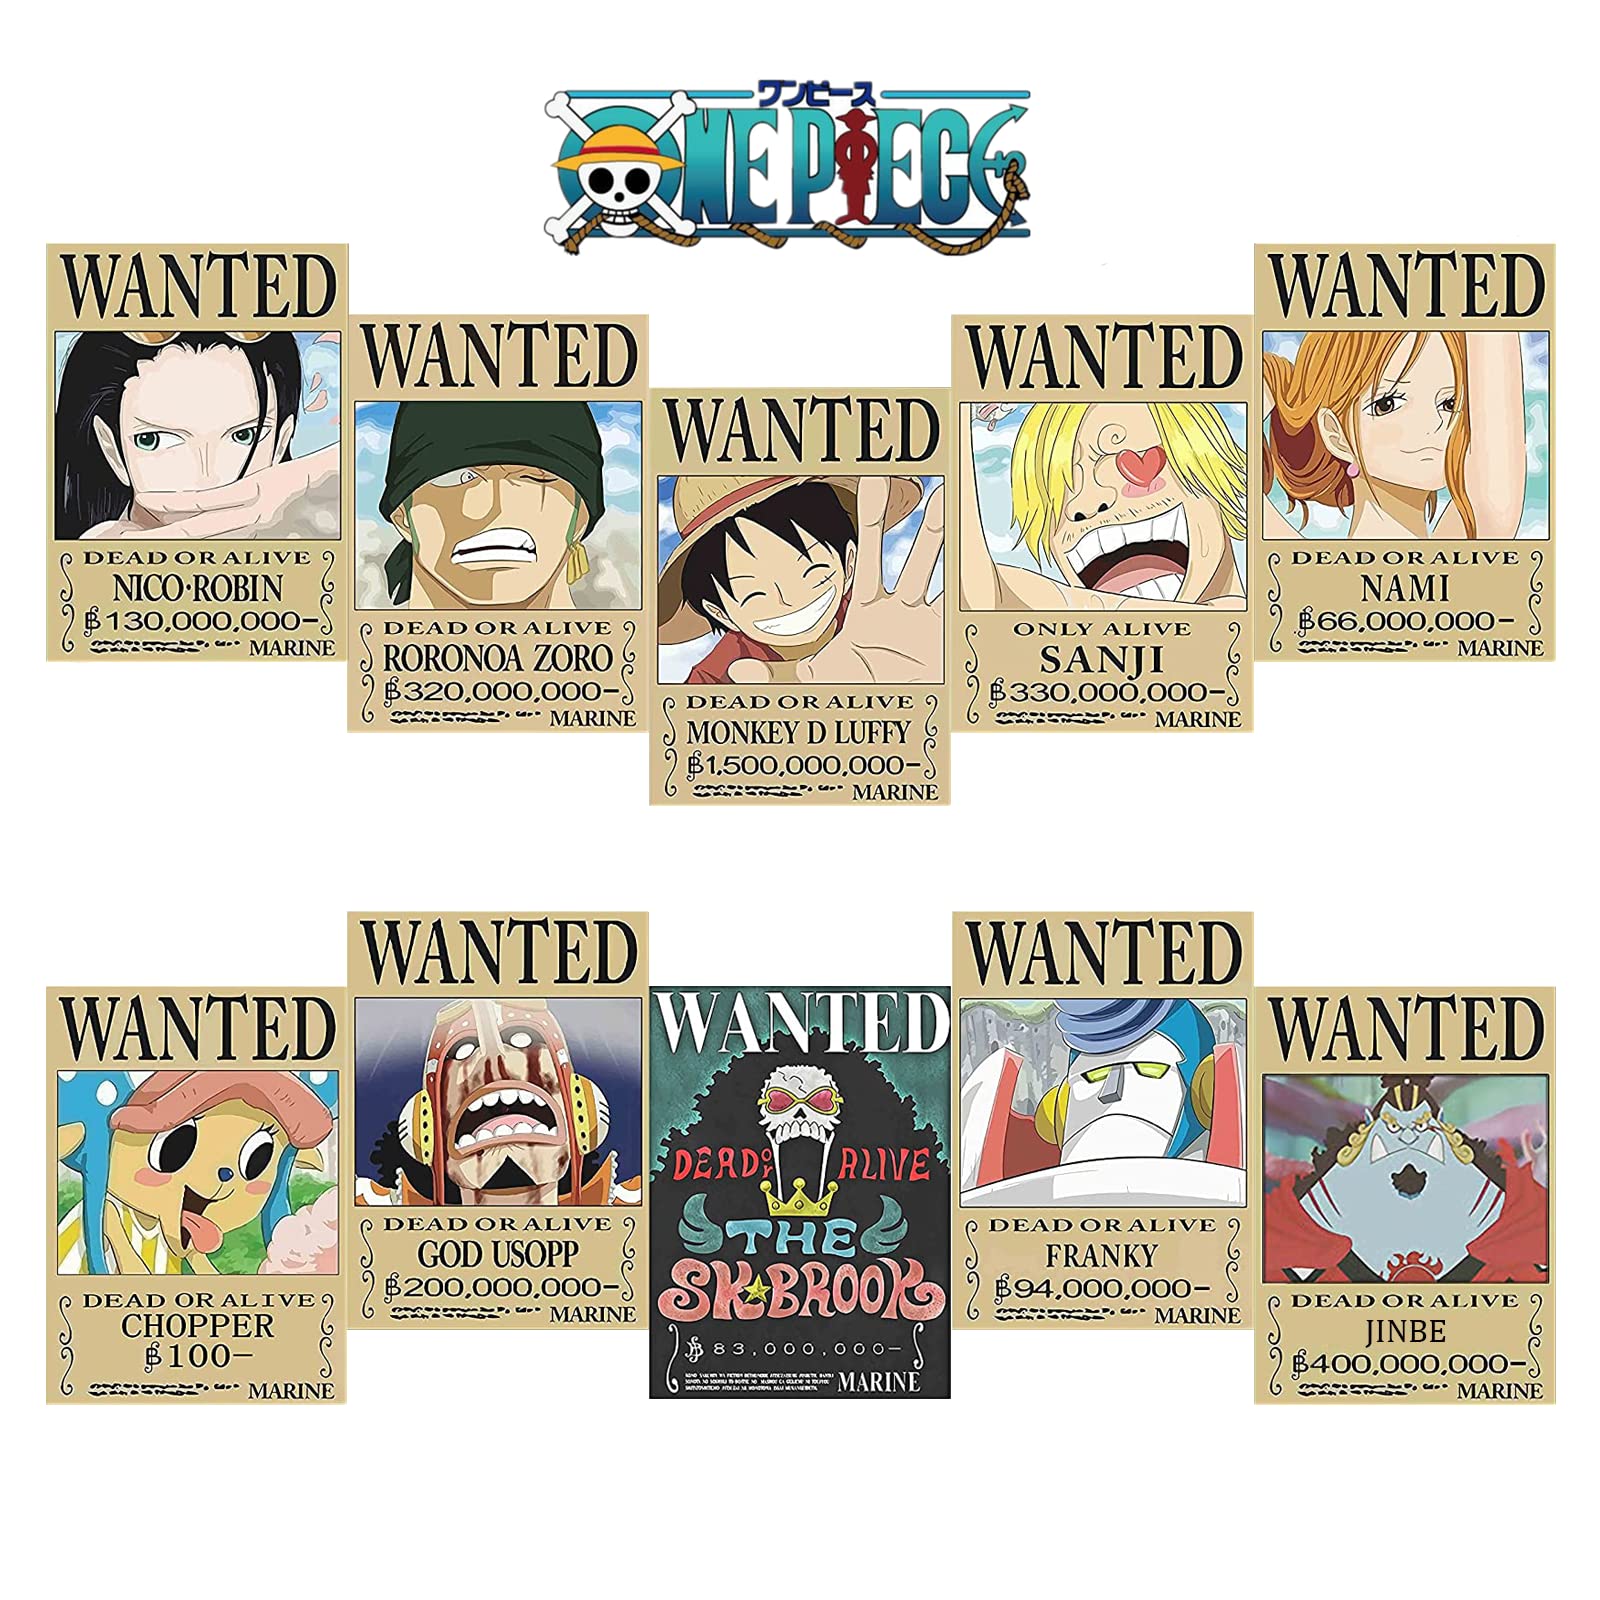 One Piece Pirates Wanted Posters, New Edition Luffy 1.5 Billion Anime Poster Straw Hat Pirates Crew Luffy Chopper Zoro Nami Usopp Sanji Jinbe Franky Brook Robin (10 Pcs), Clothing, Shoes